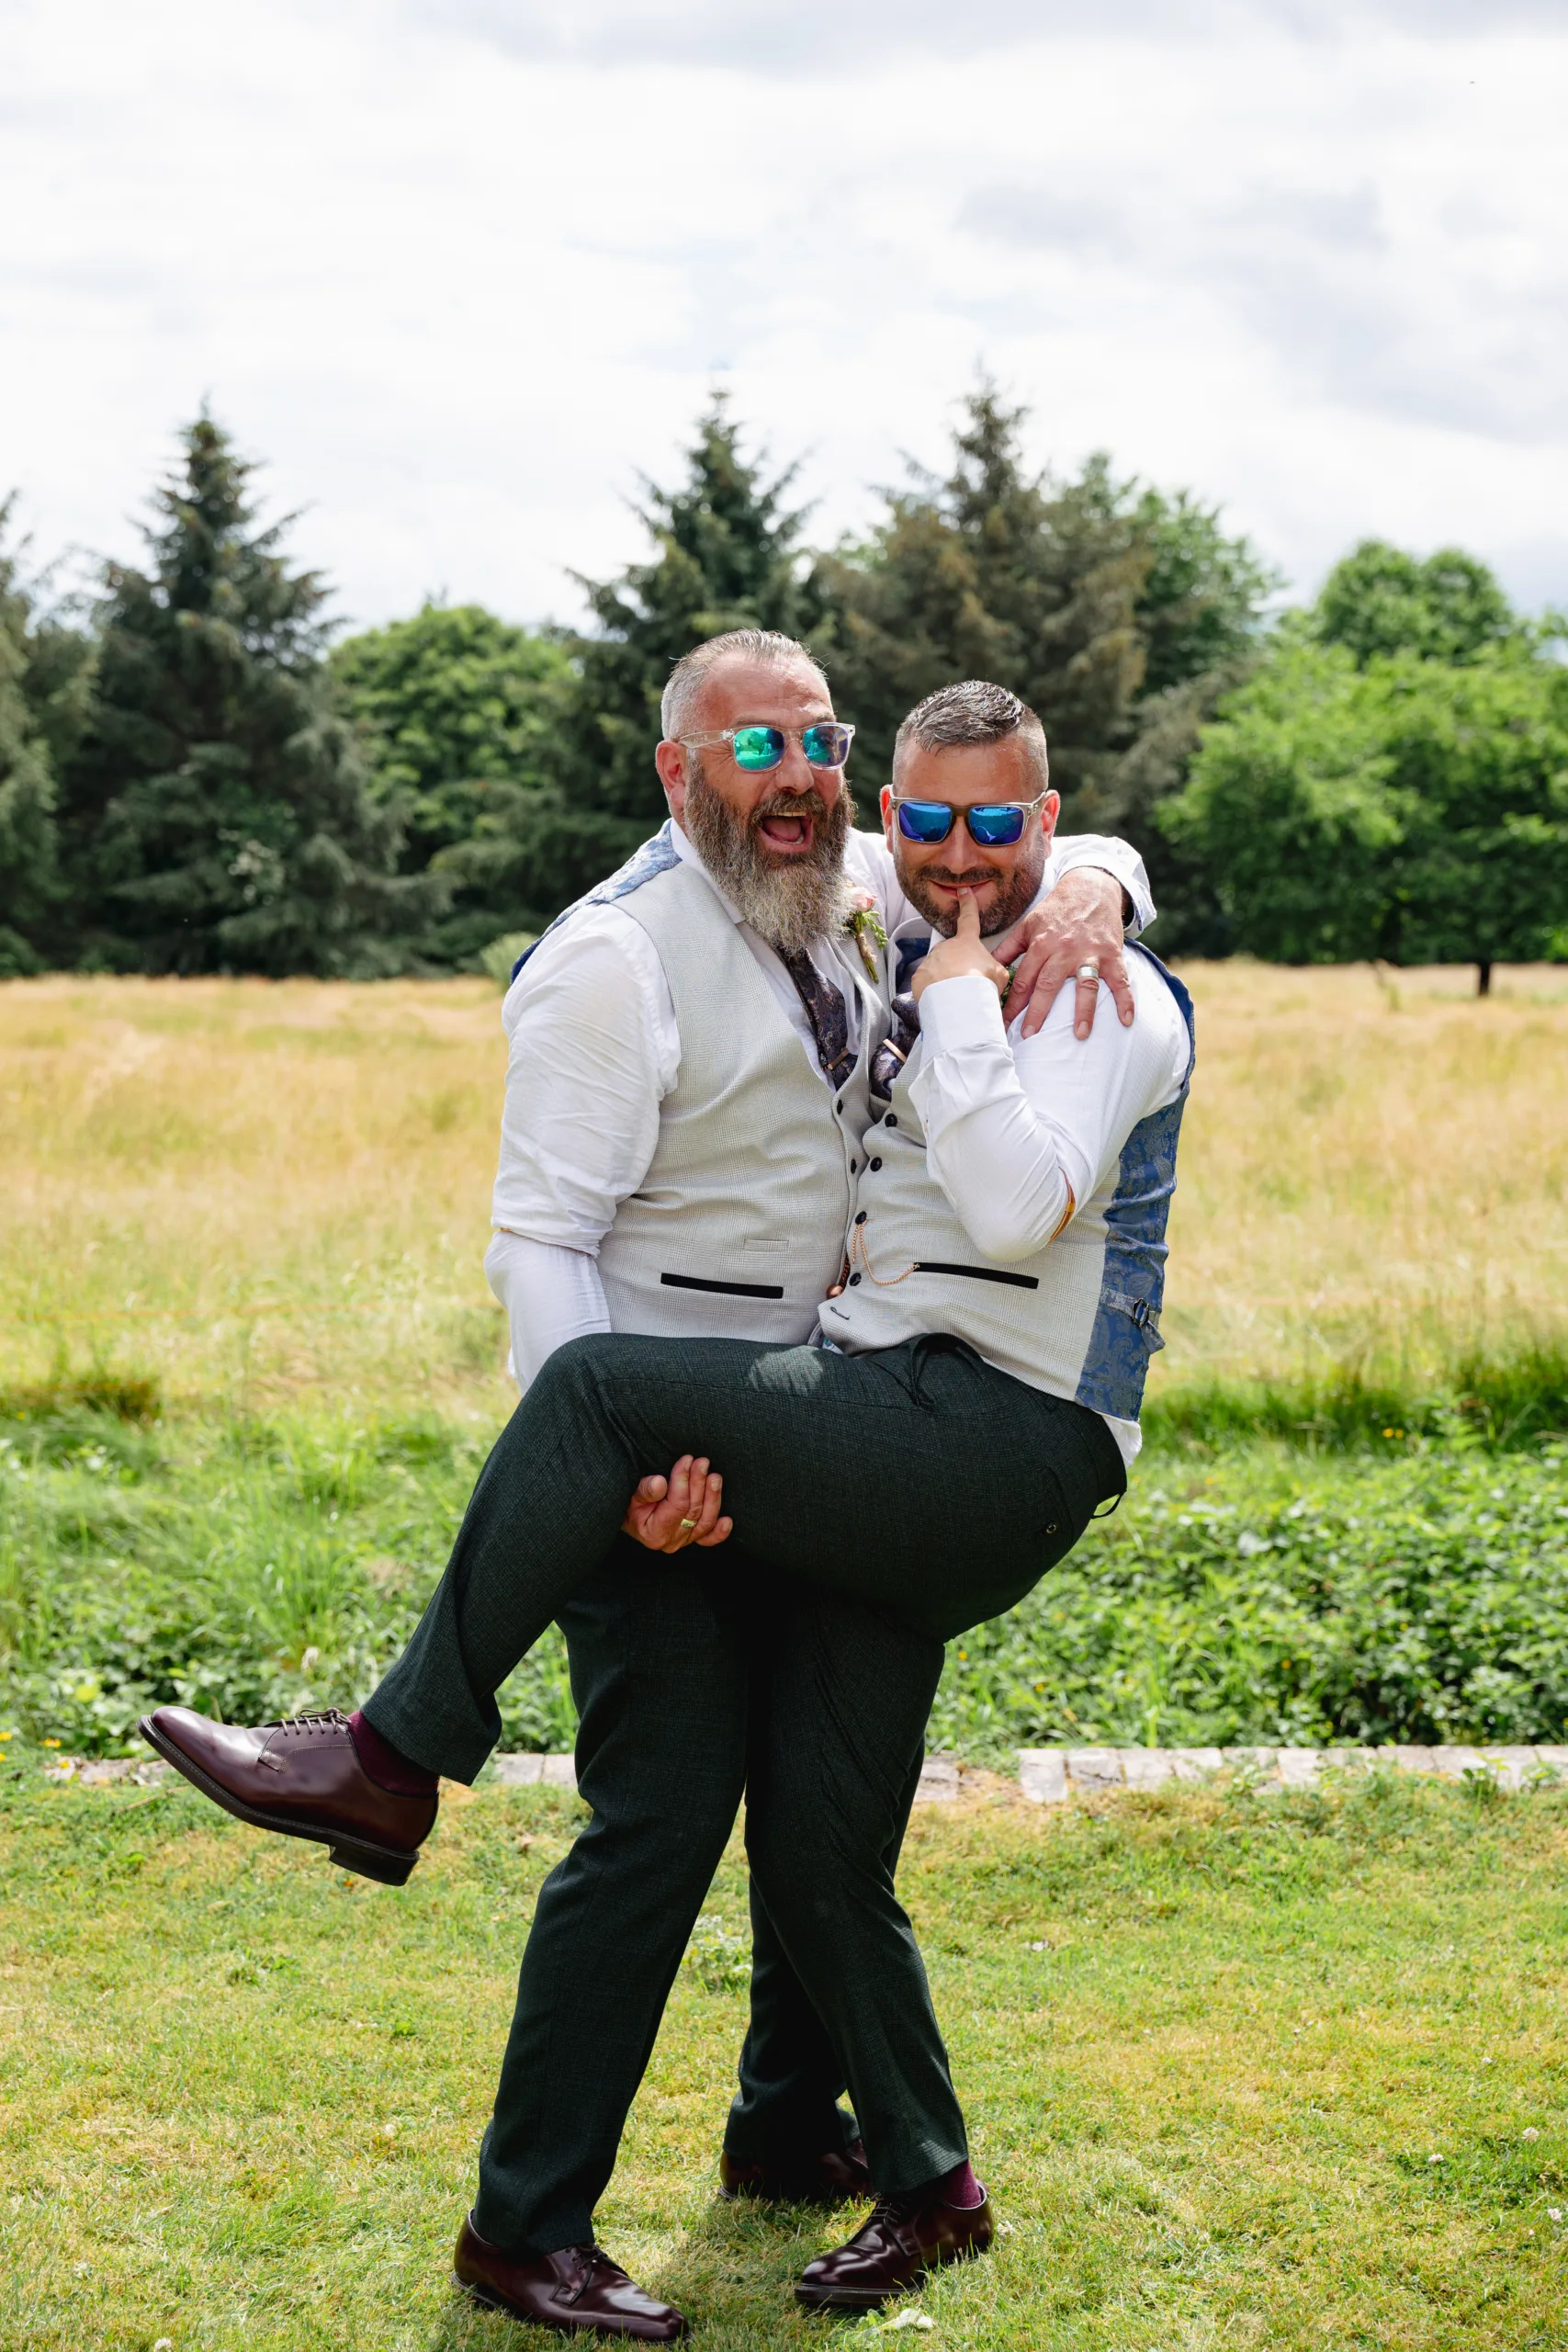 In this heartwarming family photo, two men embrace each other in a beautiful field.